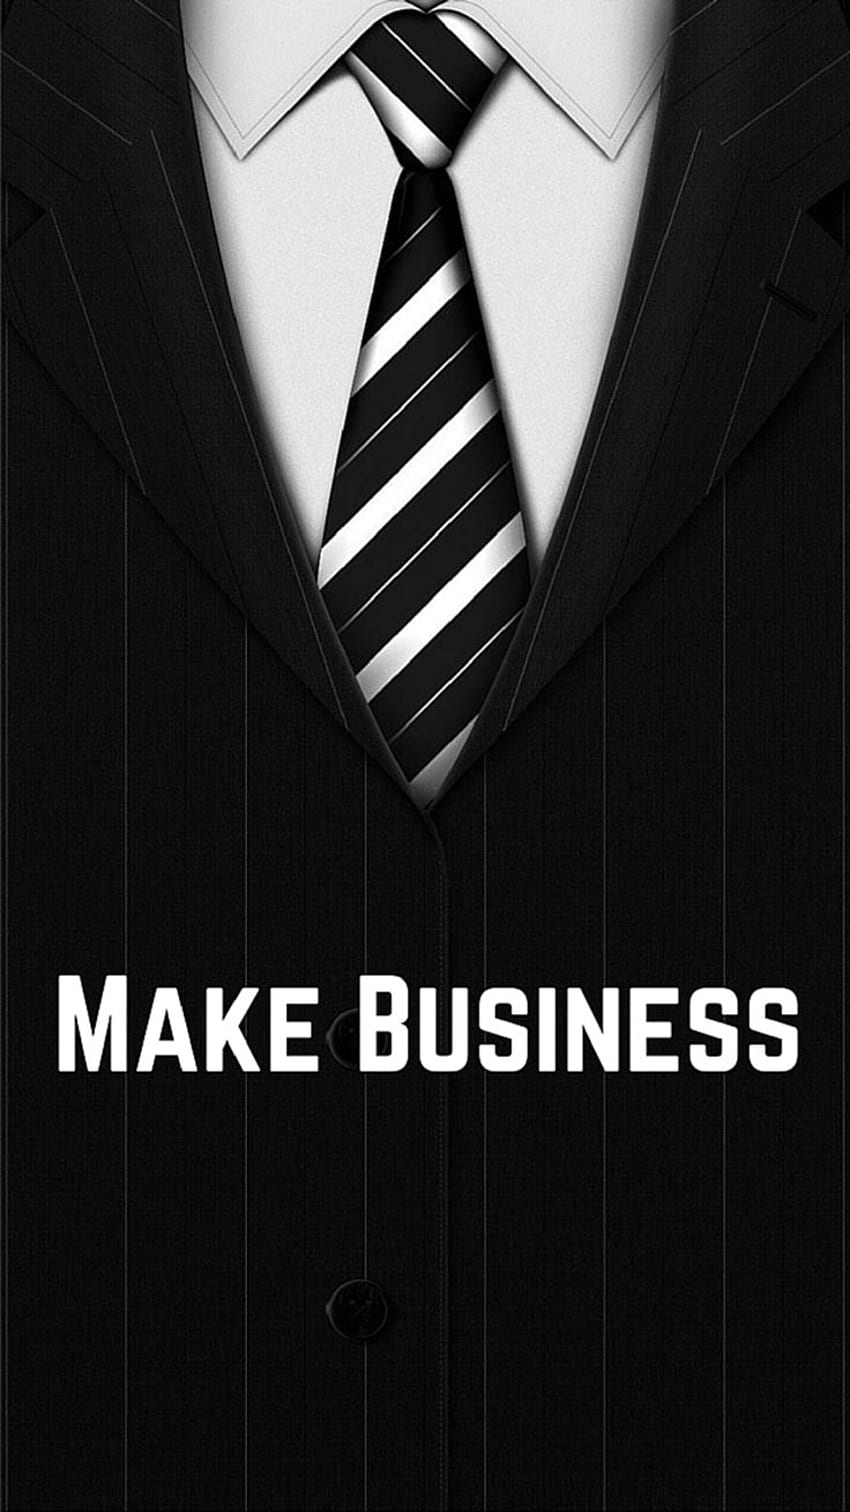 Ƒ↑TAP AND GET THE APP! Art Creative Quote Business Tie Suit Shirt Black White iPhone 6 HD phone wallpaper